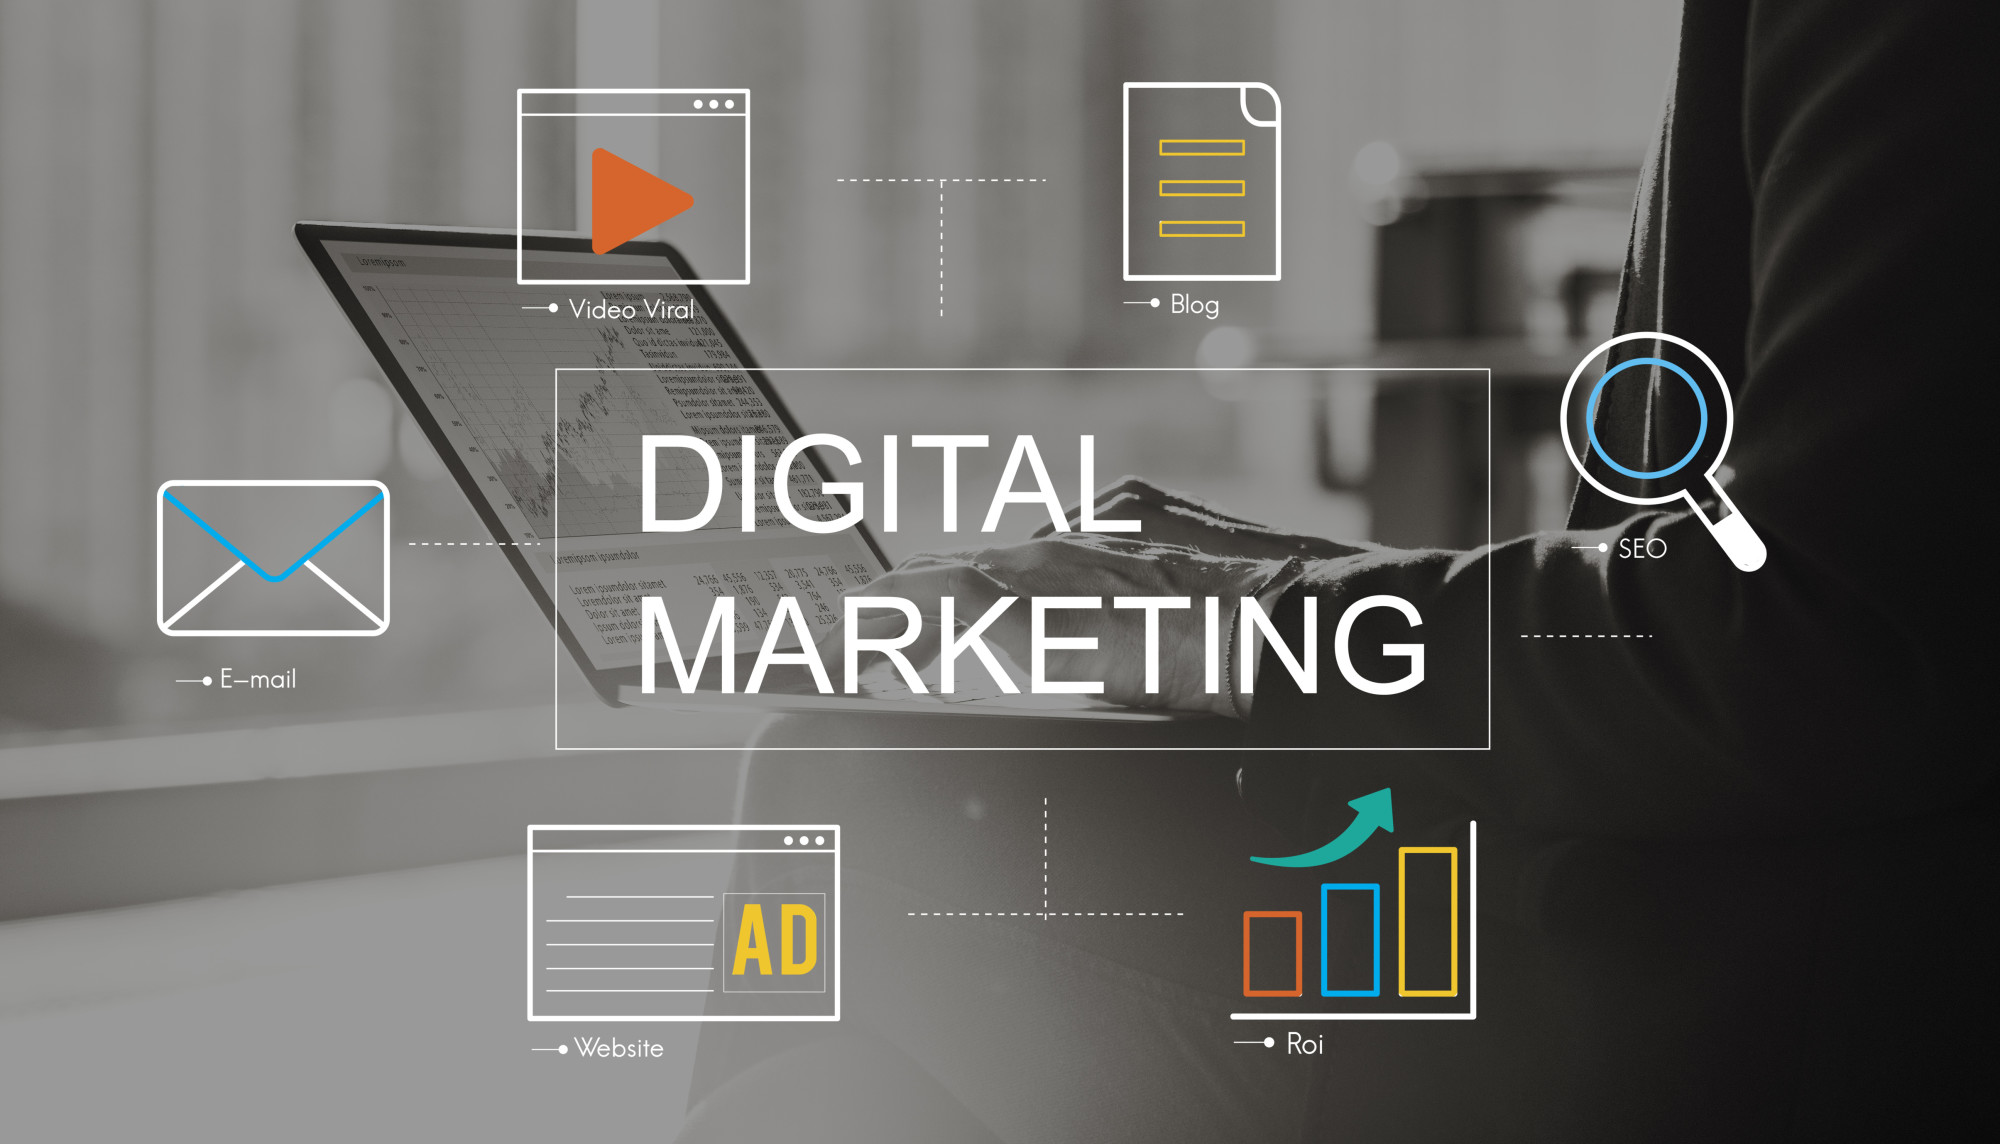 10 Digital Marketing Tips for Small Businesses